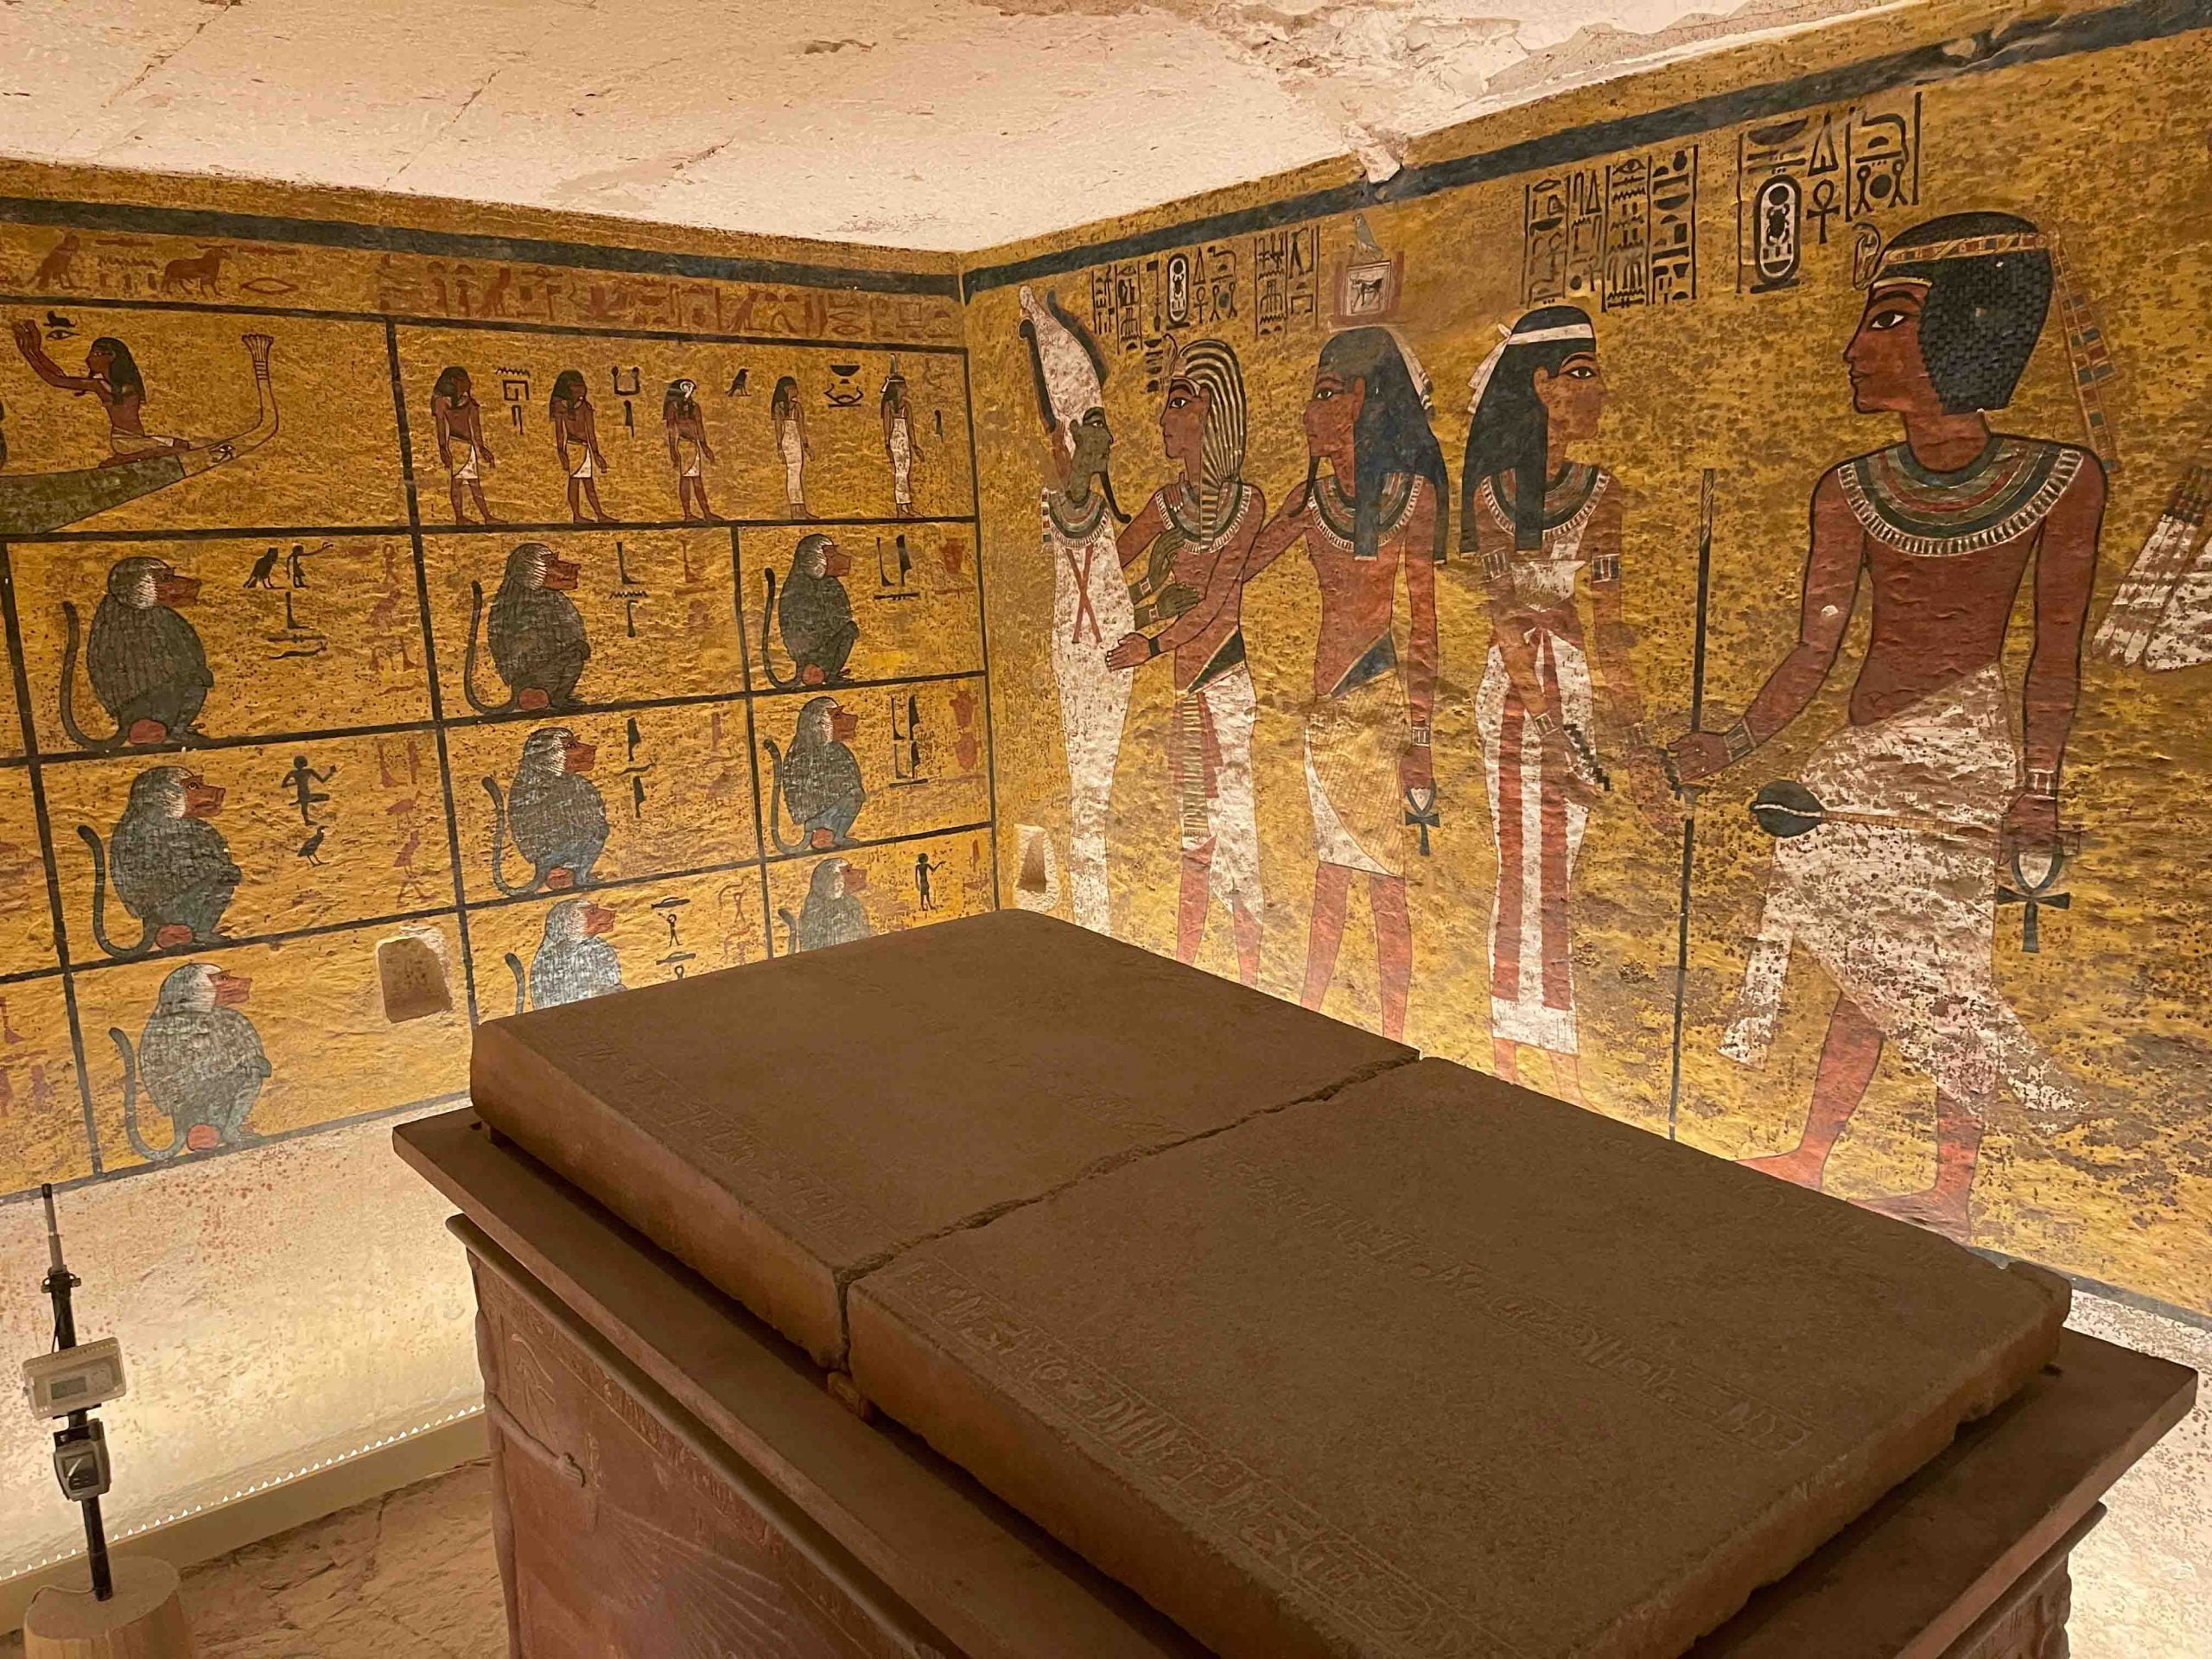 Virtual Tour the Tomb of King Tut: (Un)Complicating the Story of the Discovery of the Tomb